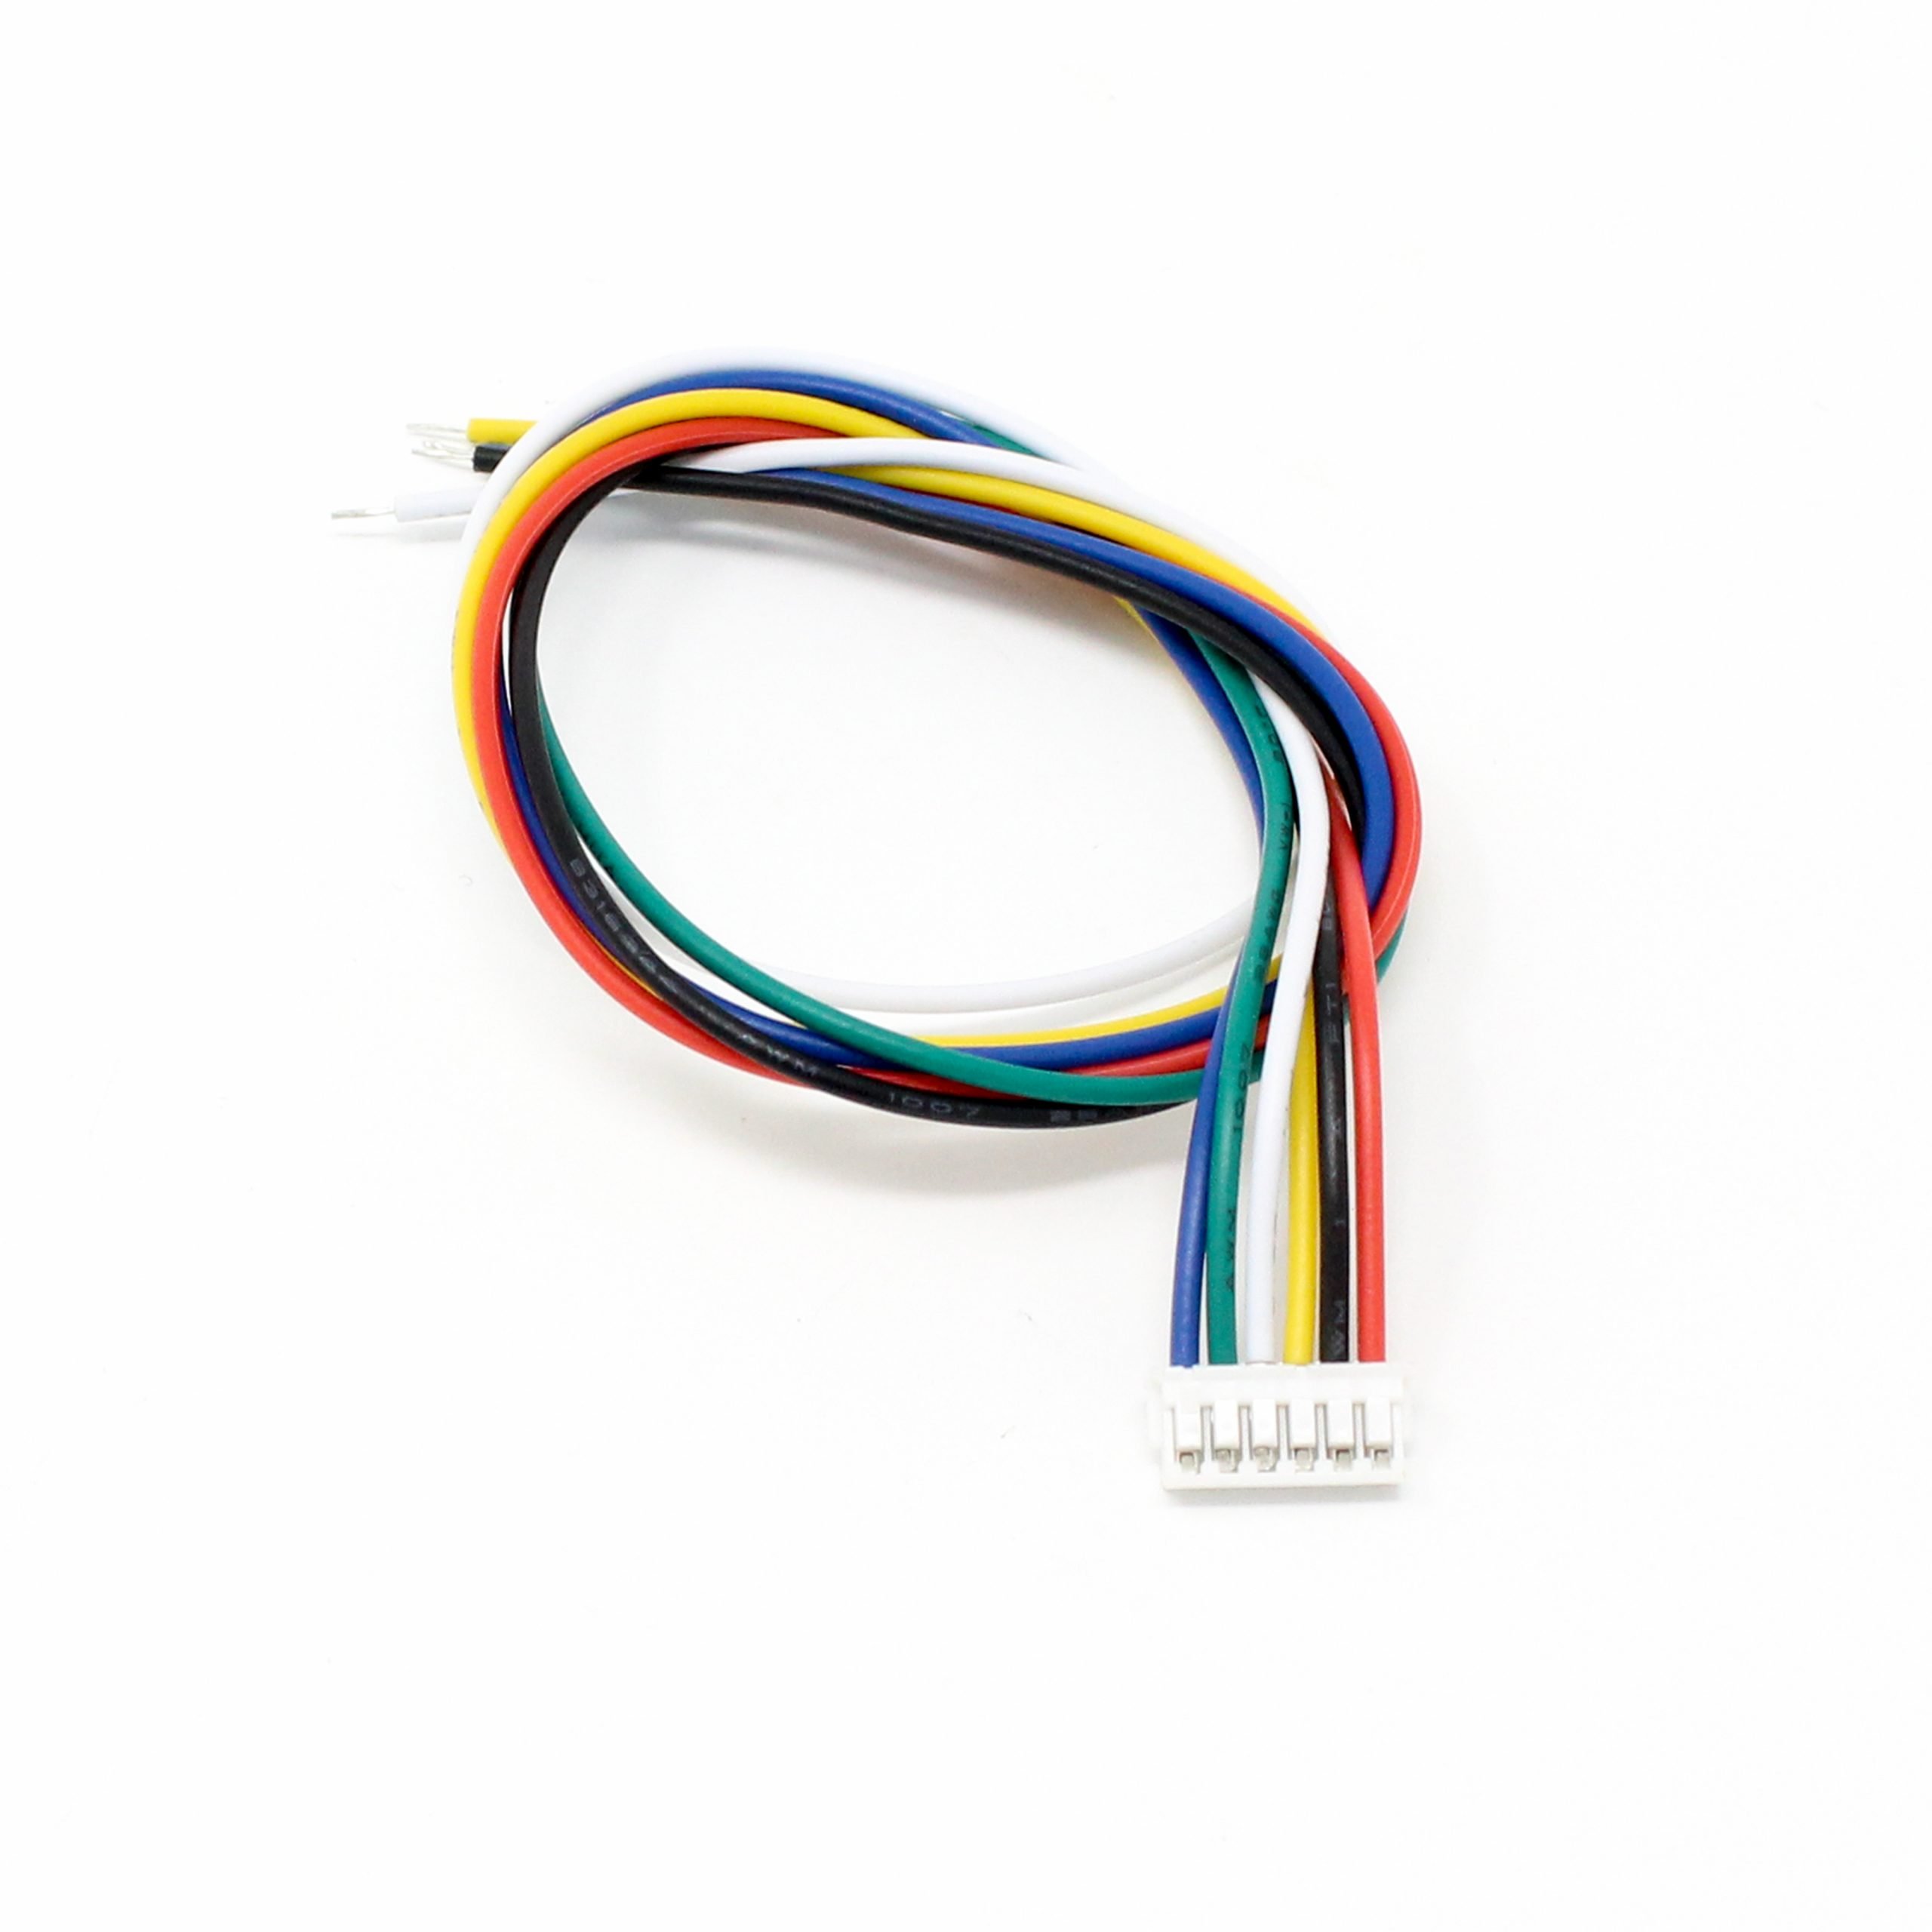 Jst Sh 6-Pin Connectors (2.15Mm Pin Spacing With 200Mm Wires)